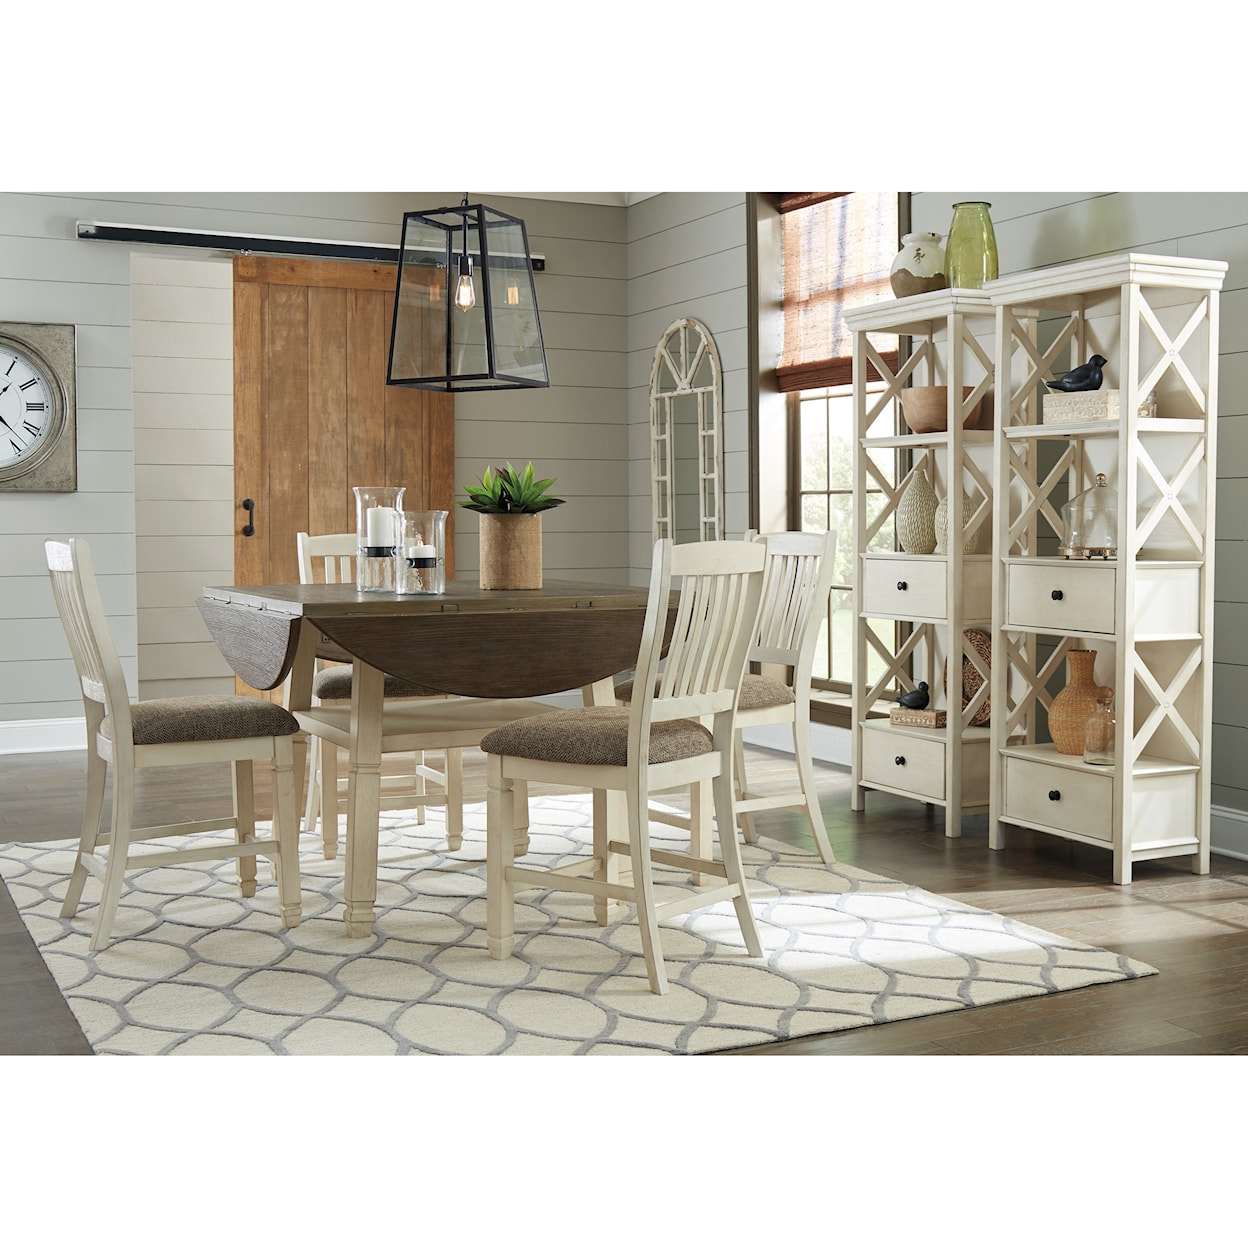 Signature Design by Ashley Bolanburg Casual Dining Room Group